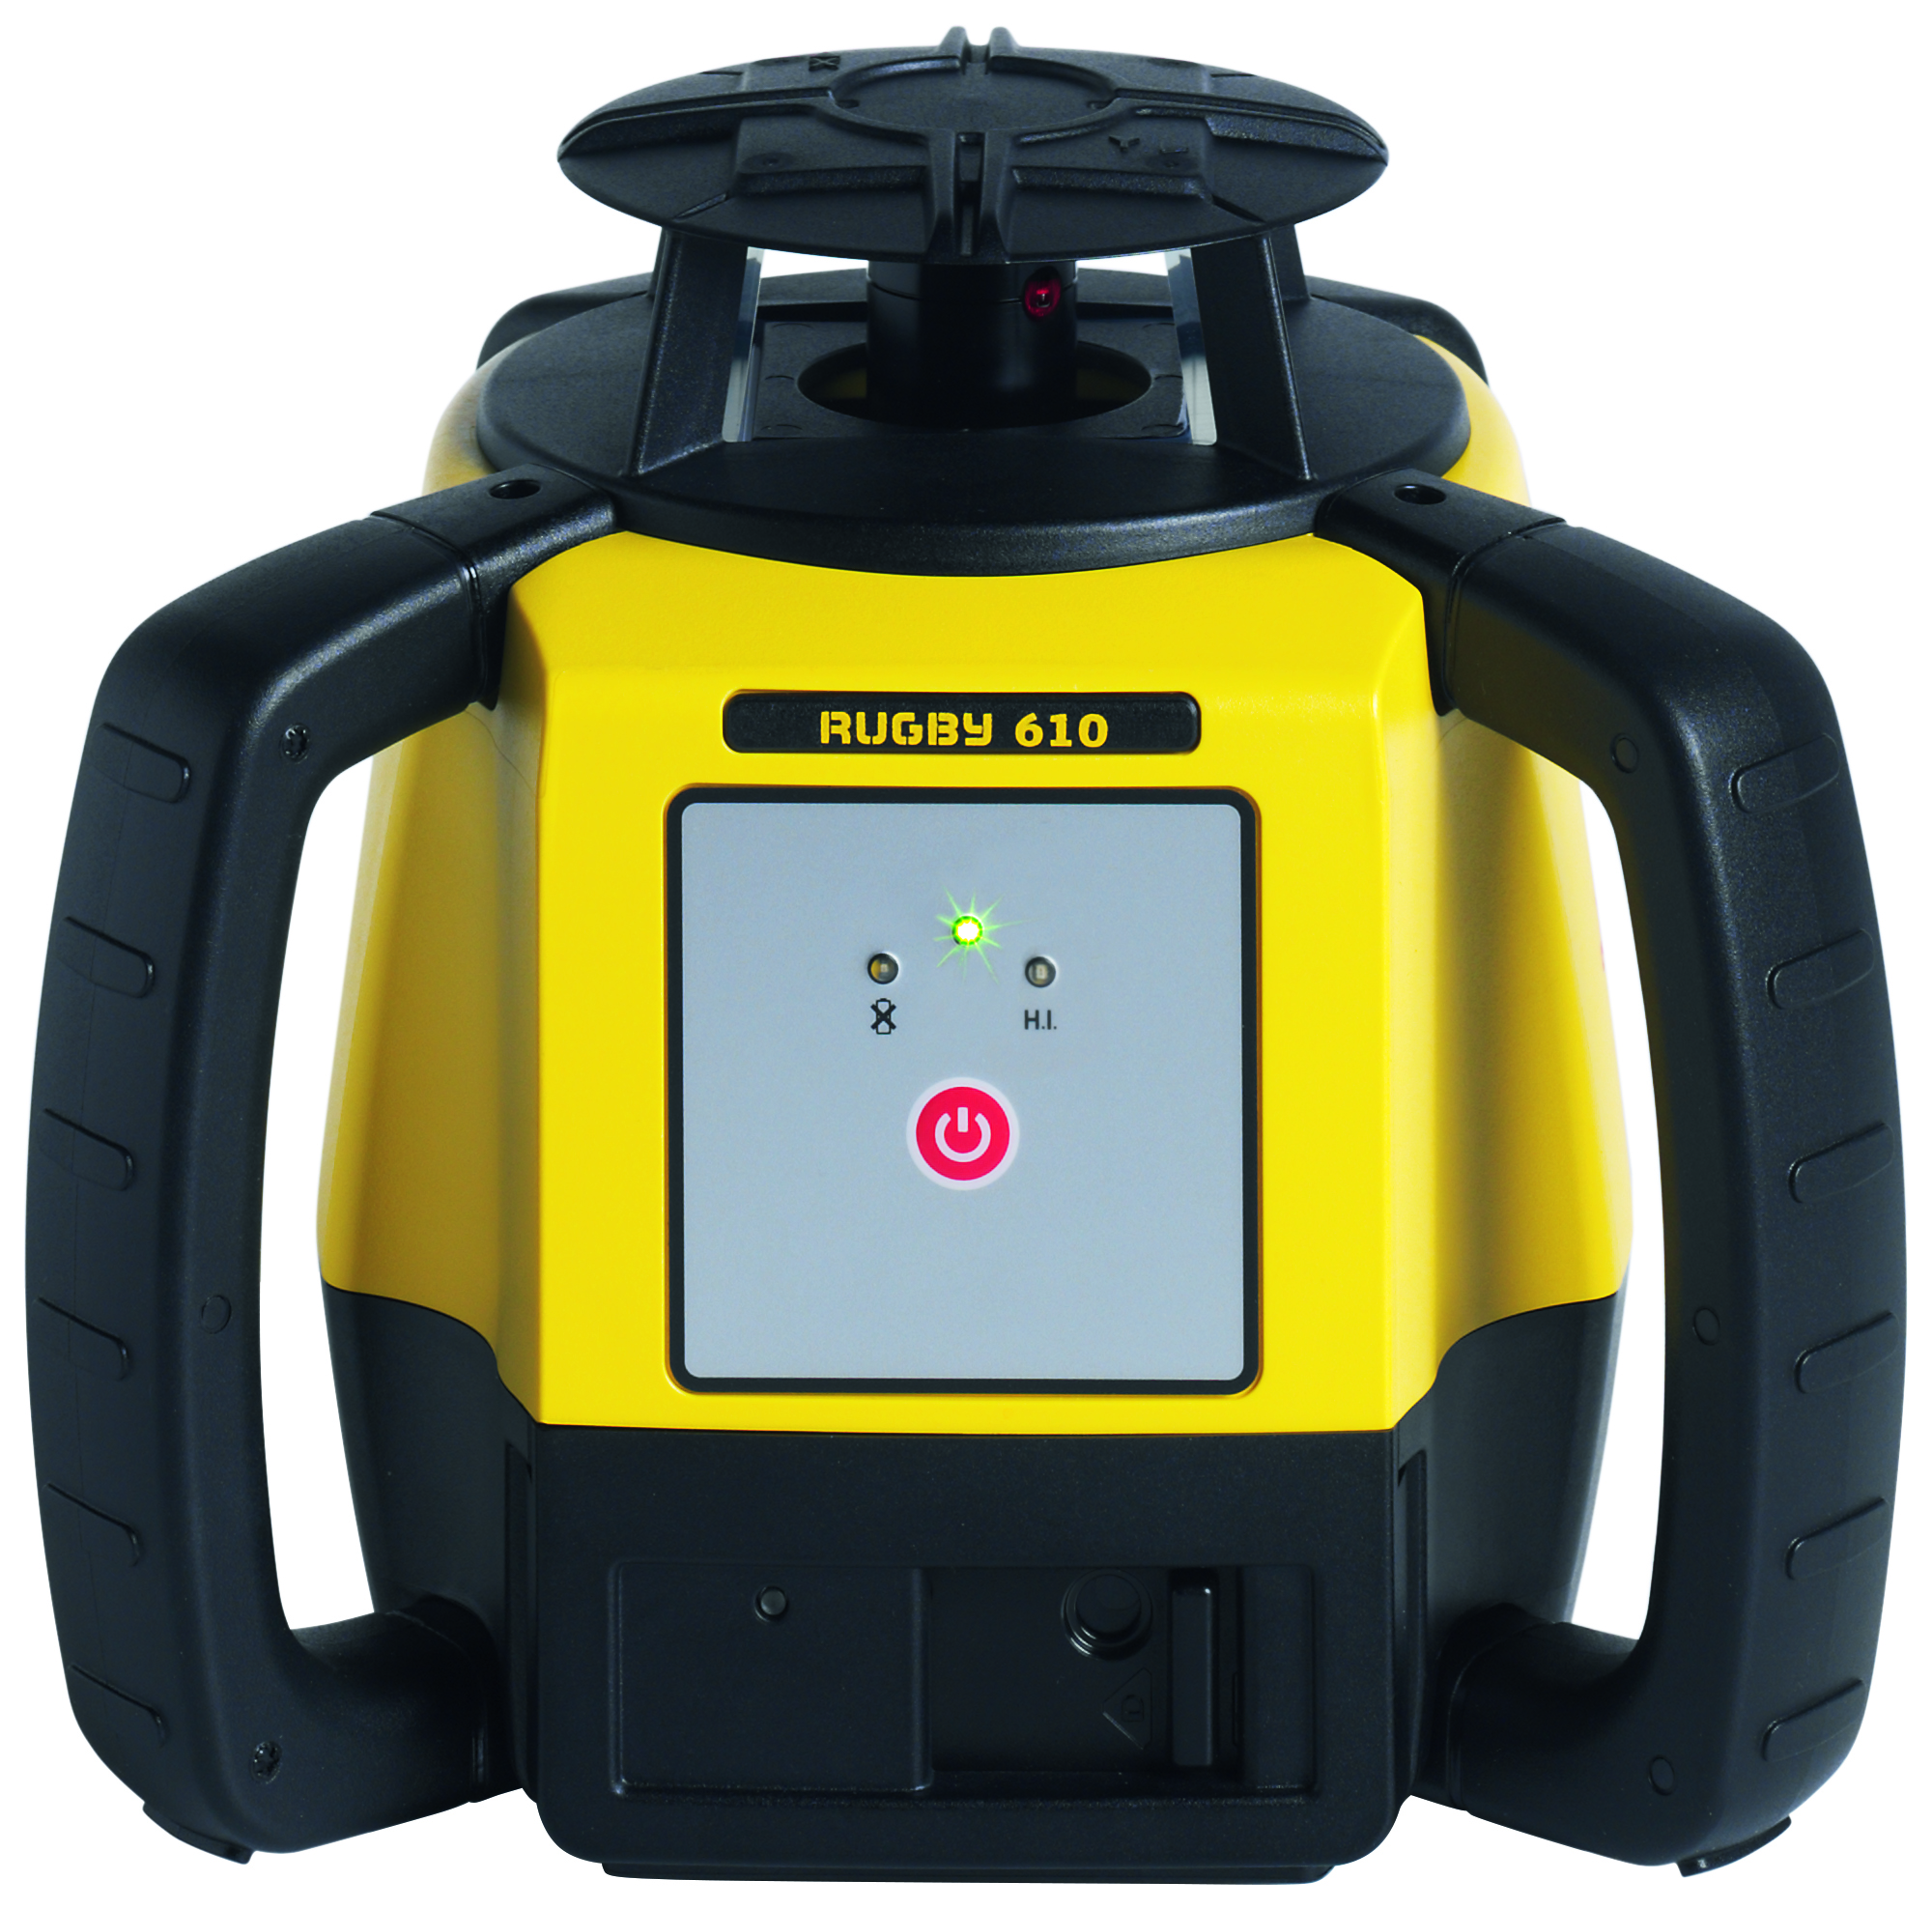 Leica Rugby 610 RE120 Alkaline Self Levelling Rotating Laser Level